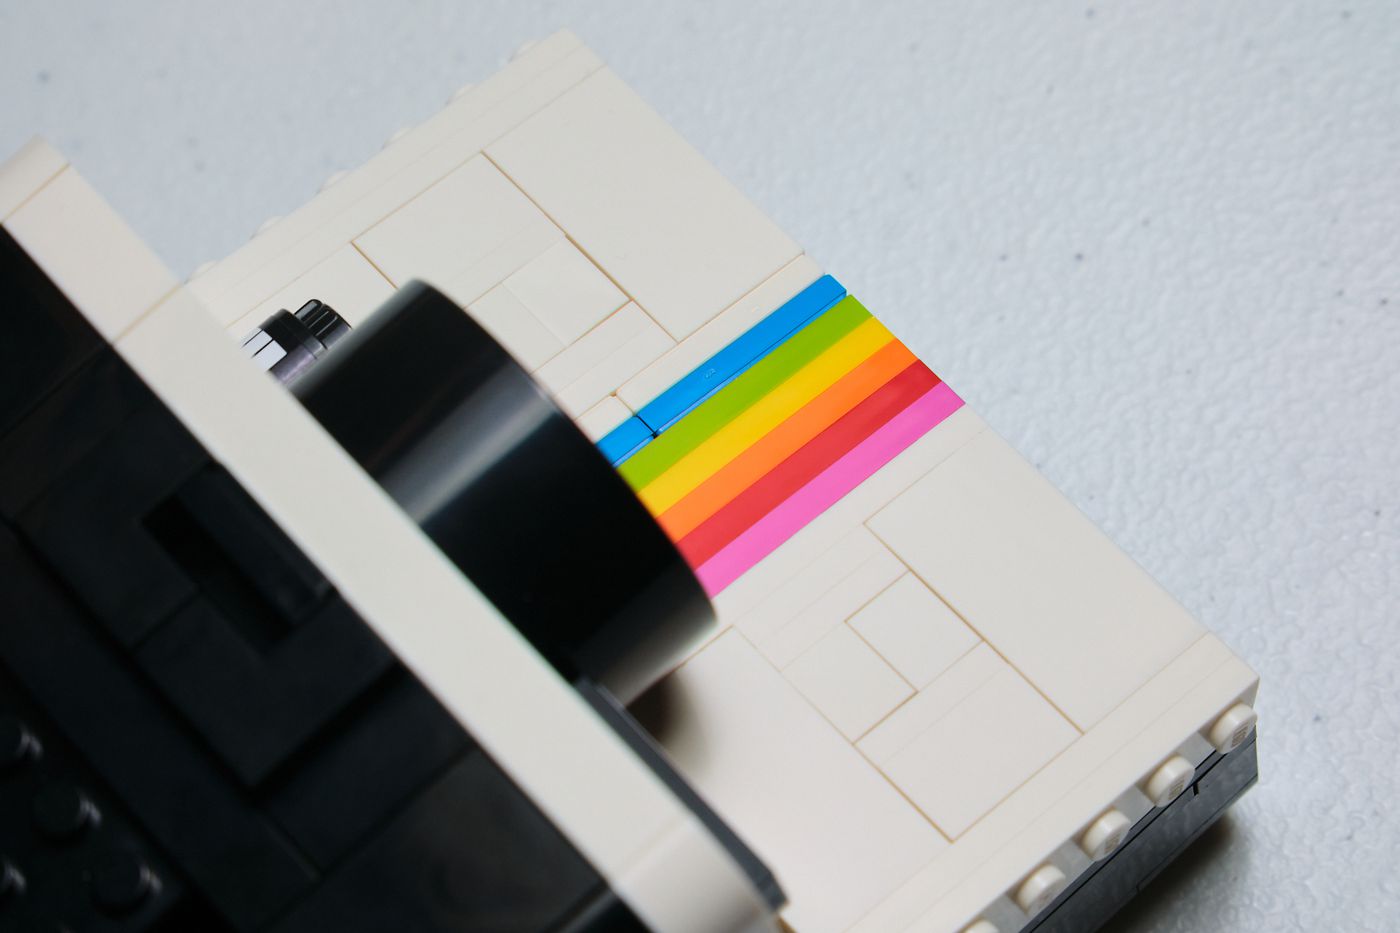 The brick-built rainbow stripe that adorns the front of the Lego camera. Here it is all together, close enough so you can see the gaps that show how it was made.